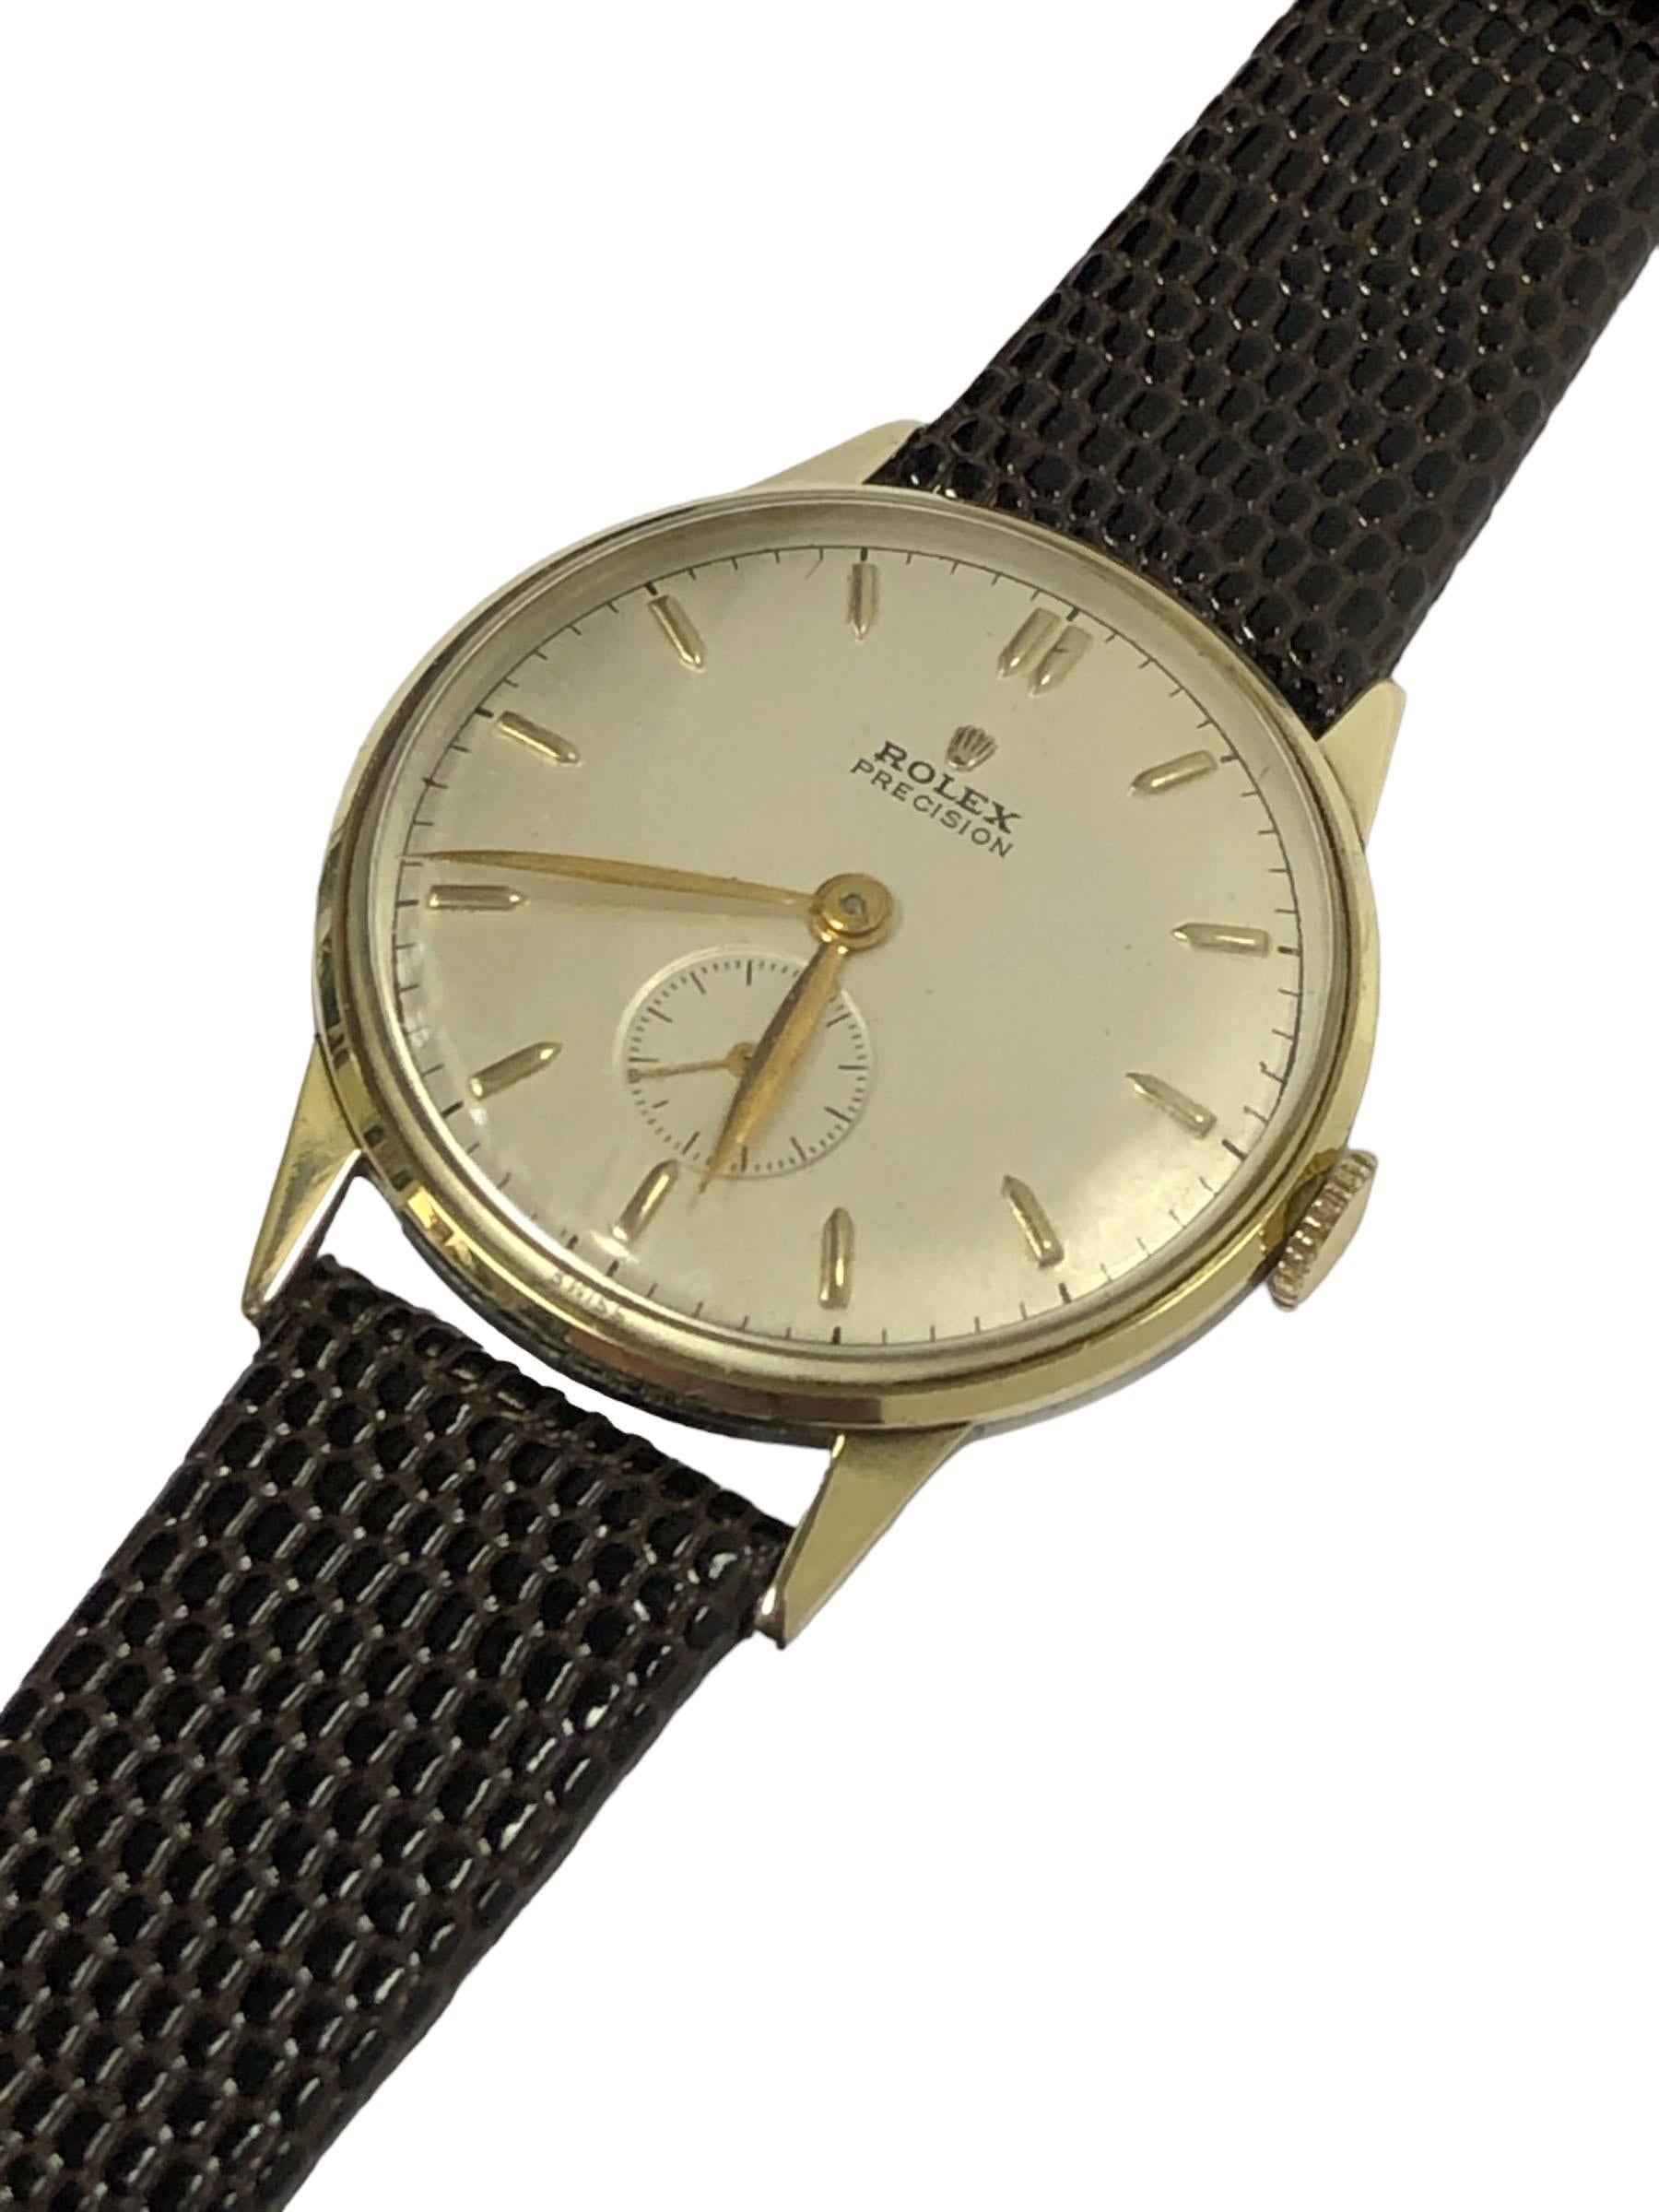 Circa 1952 Rolex Wrist Watch, 35 M.M 3 piece snap back case with Yellow Gold Bezel, Lug Tops and Crown. 17 Jewel Mechanical, Manual wind movement, older Quality Restored Silver Satin Dial with Raised Markers and a sub seconds Chapter, original